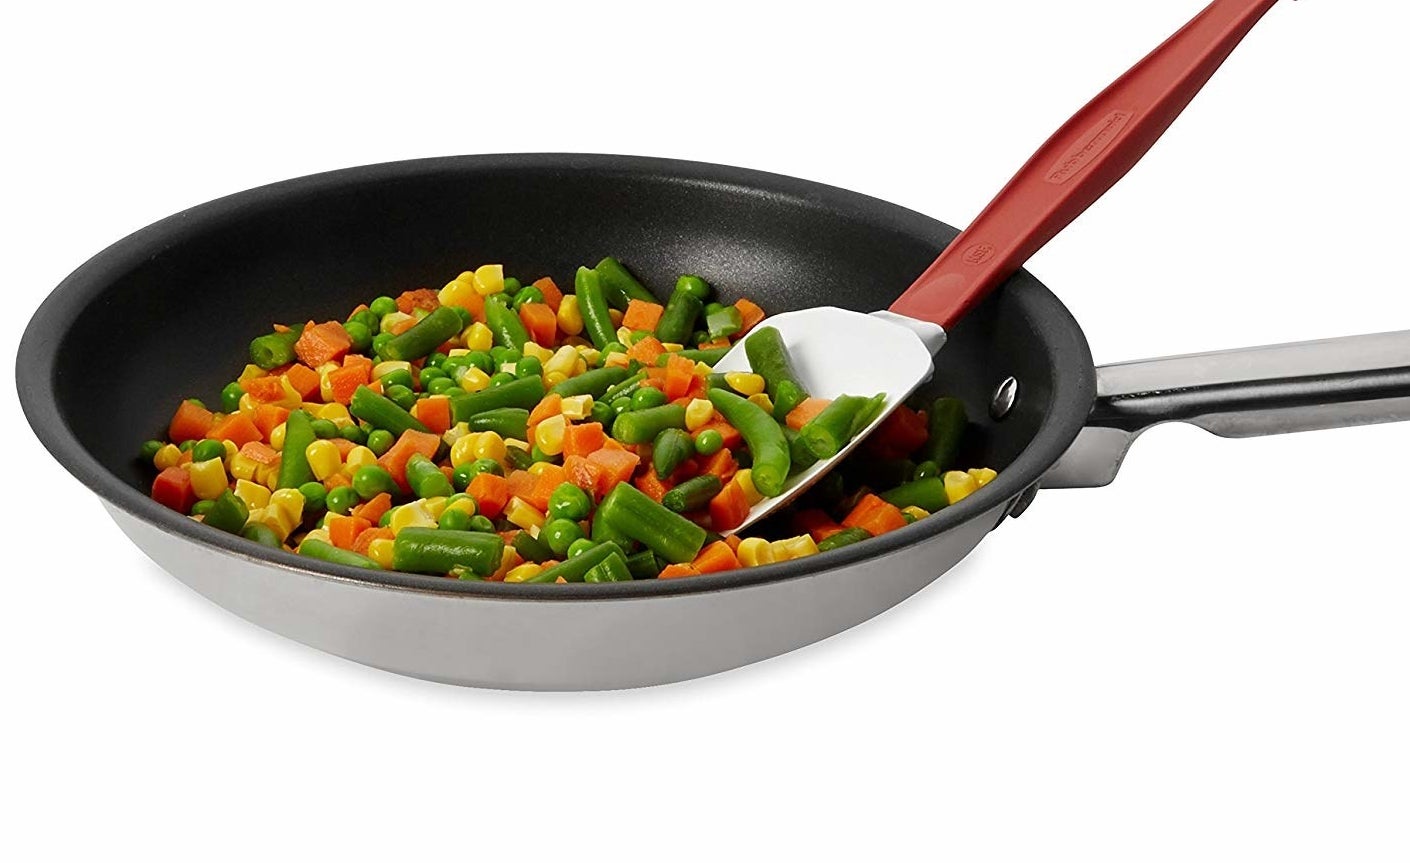 Buzzfeed, Walmart collaborate on line of inexpensive cookware, kitchen  tools - CNET